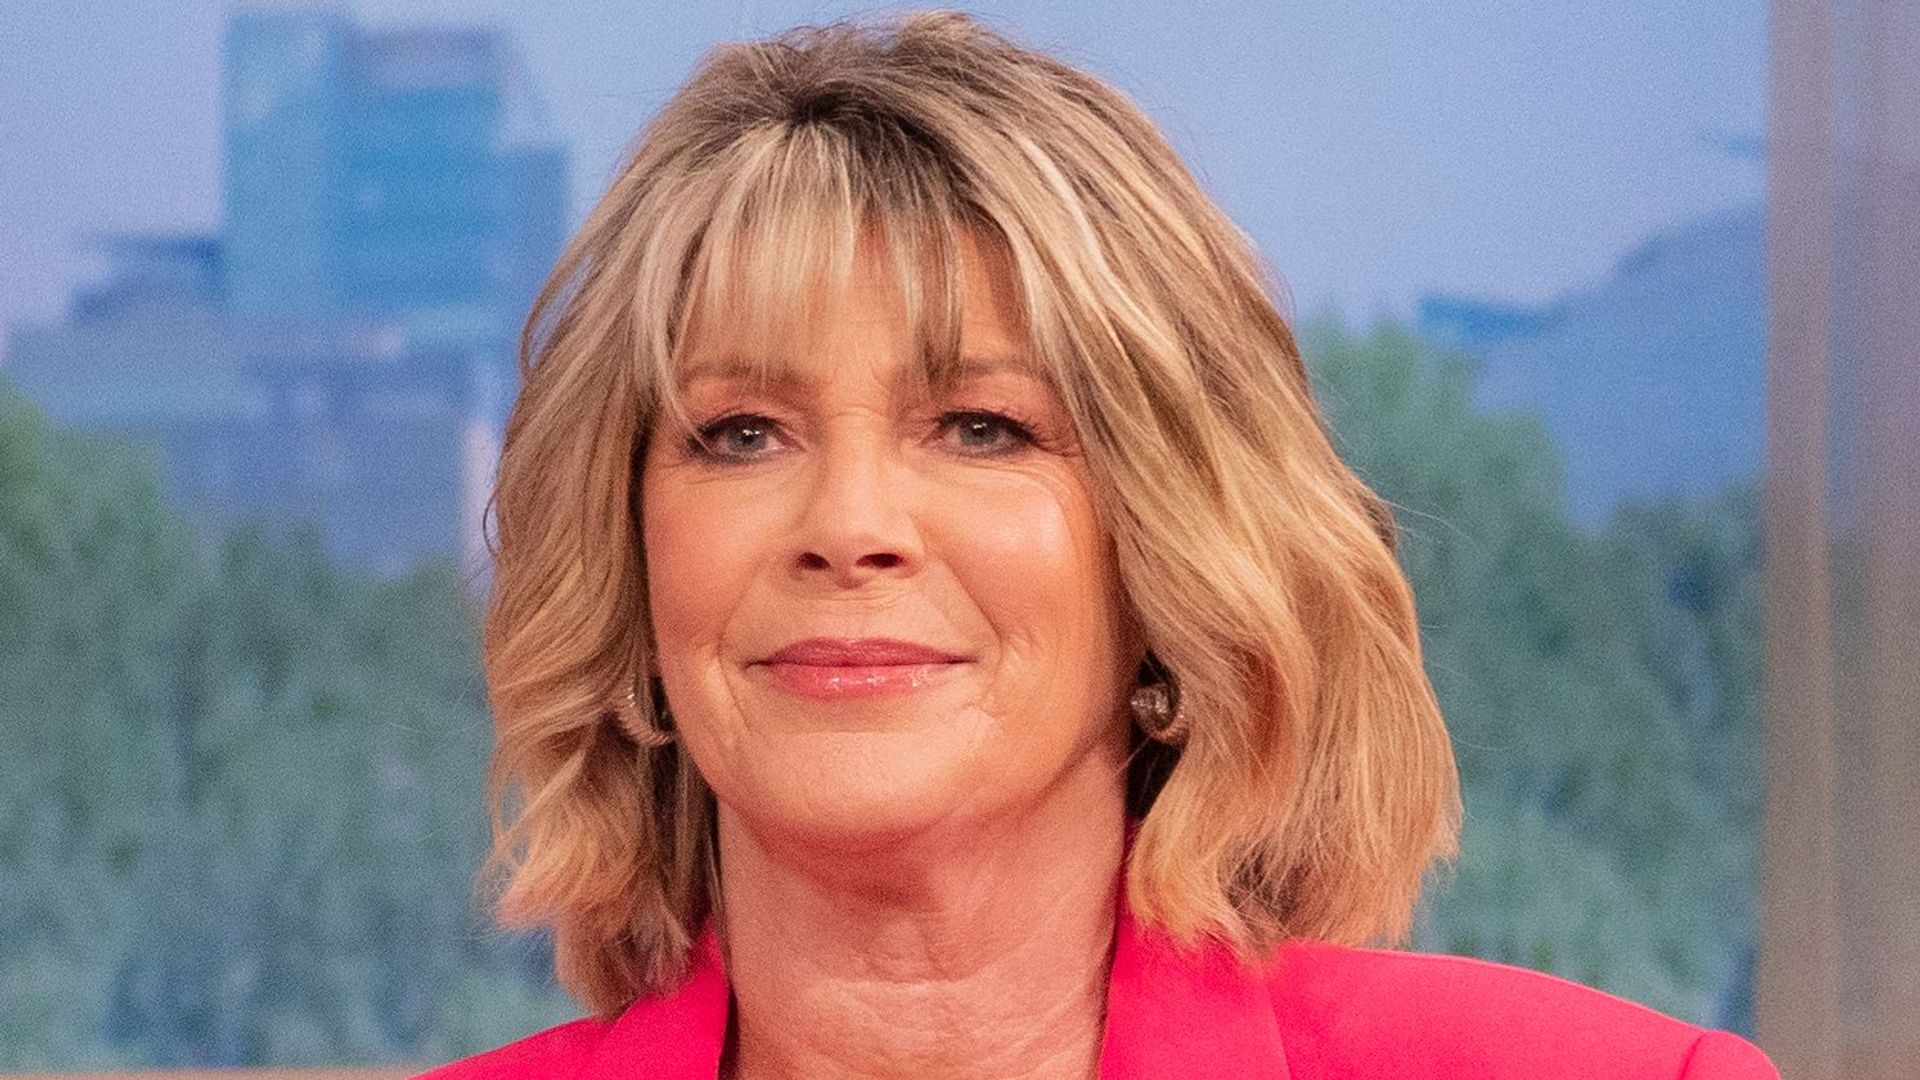 Ruth Langsford looks great in skinny jeans amid Loose Women absence